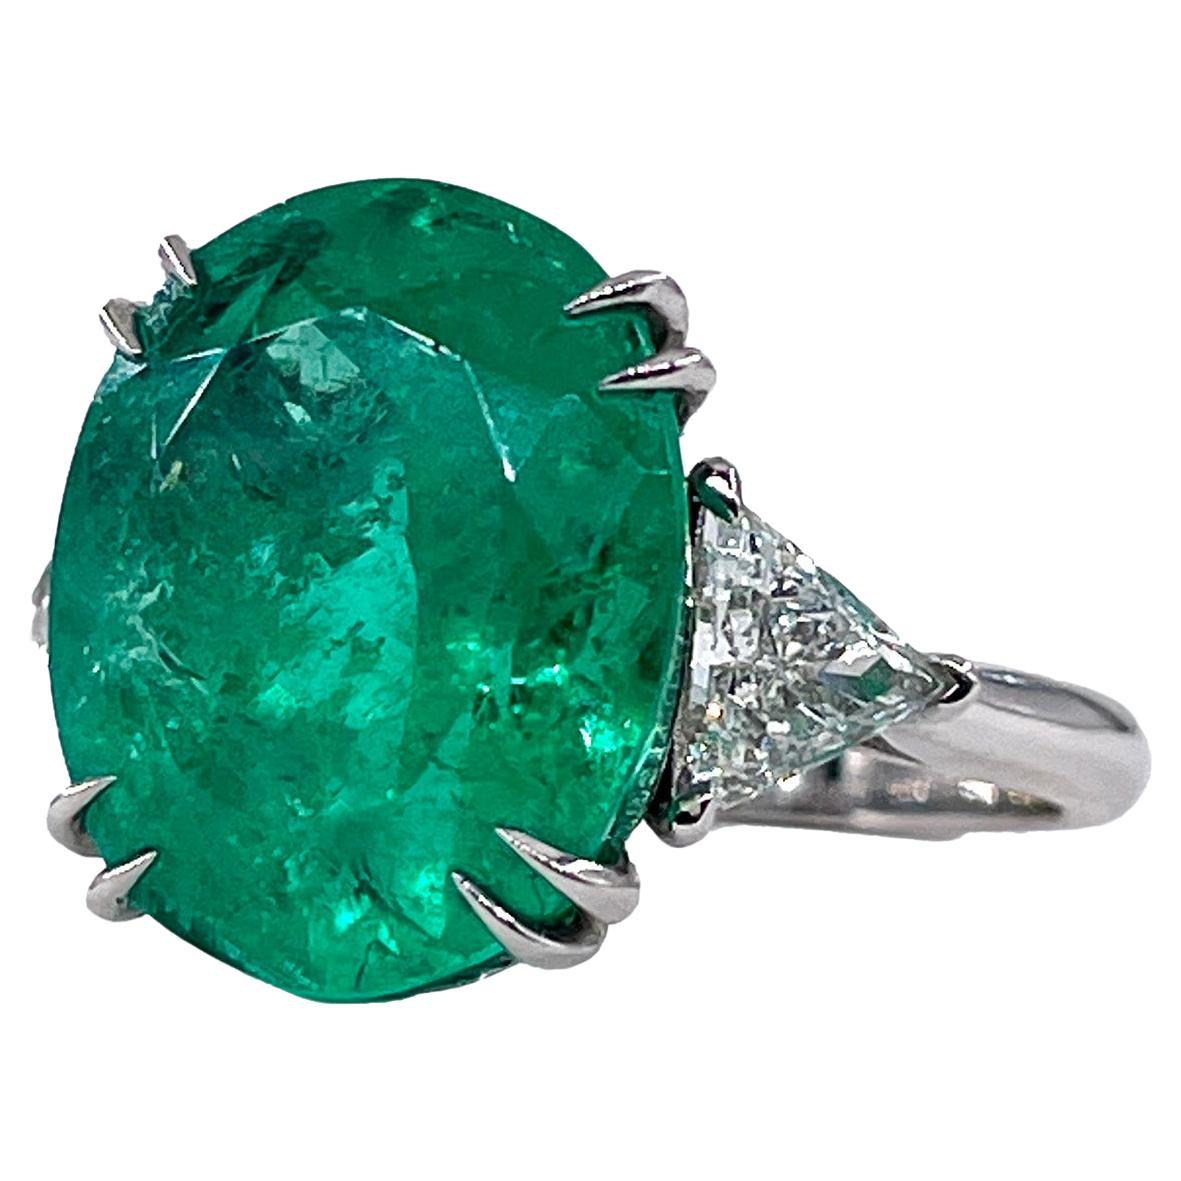 Incredible Gem and Phenomenal deal! Three Stone Engagement Anniversary Ring with GIA 9.76ct Colombian Oval Green Emerald & Diamonds.

This jewel will make a great addition to any GEM/jewelry collection... It is rear to find an emerald over 3ct size,